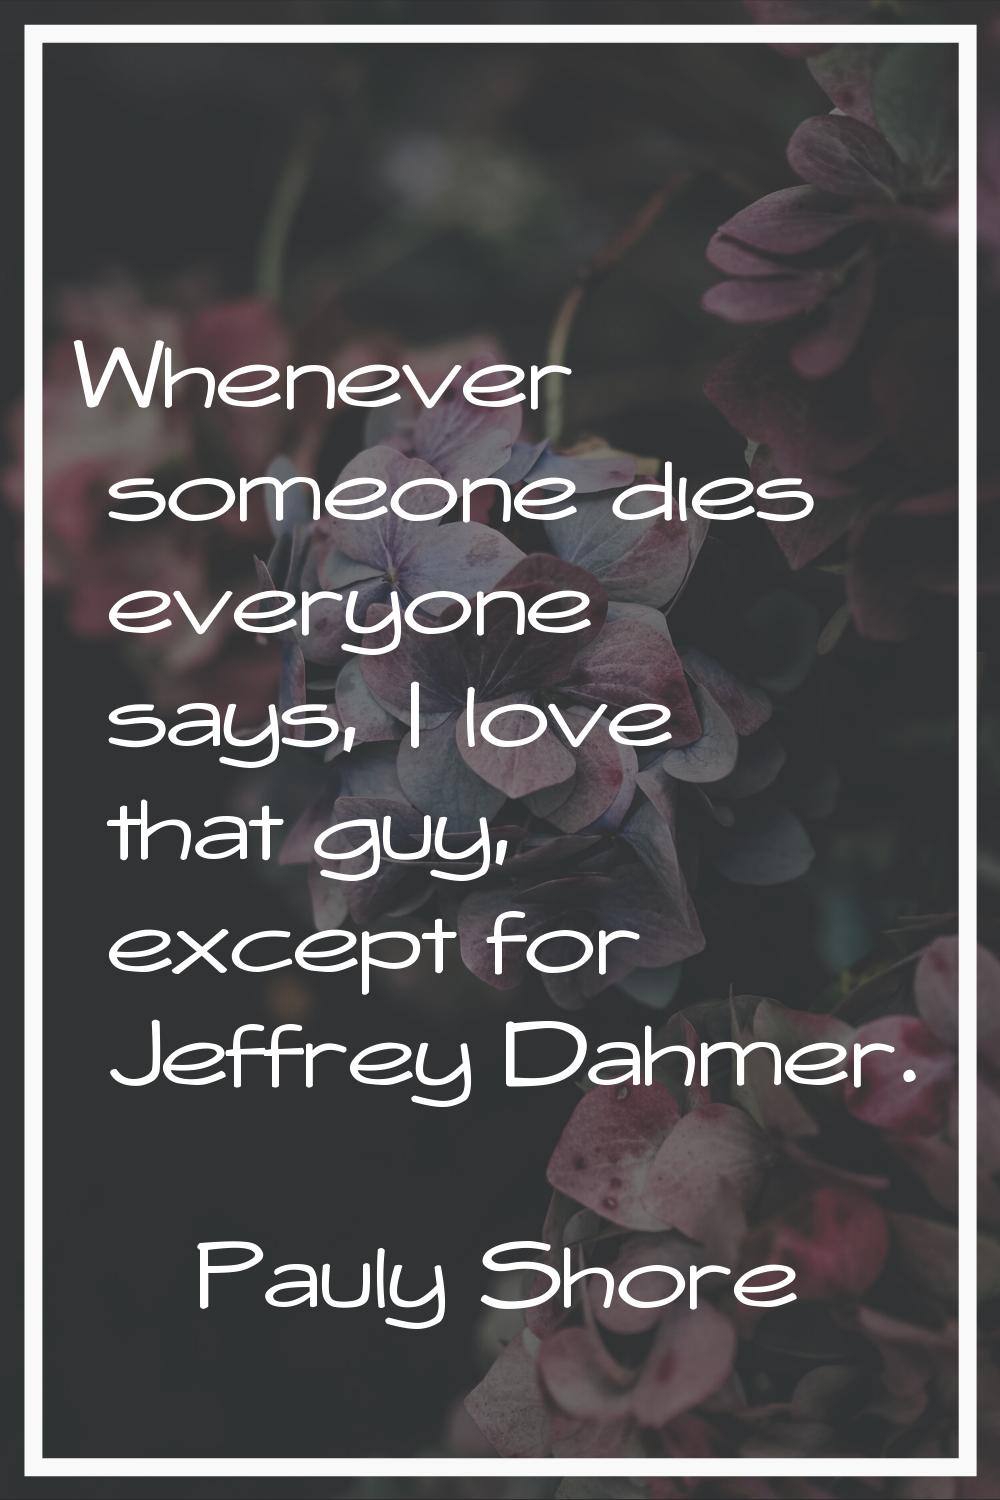 Whenever someone dies everyone says, I love that guy, except for Jeffrey Dahmer.